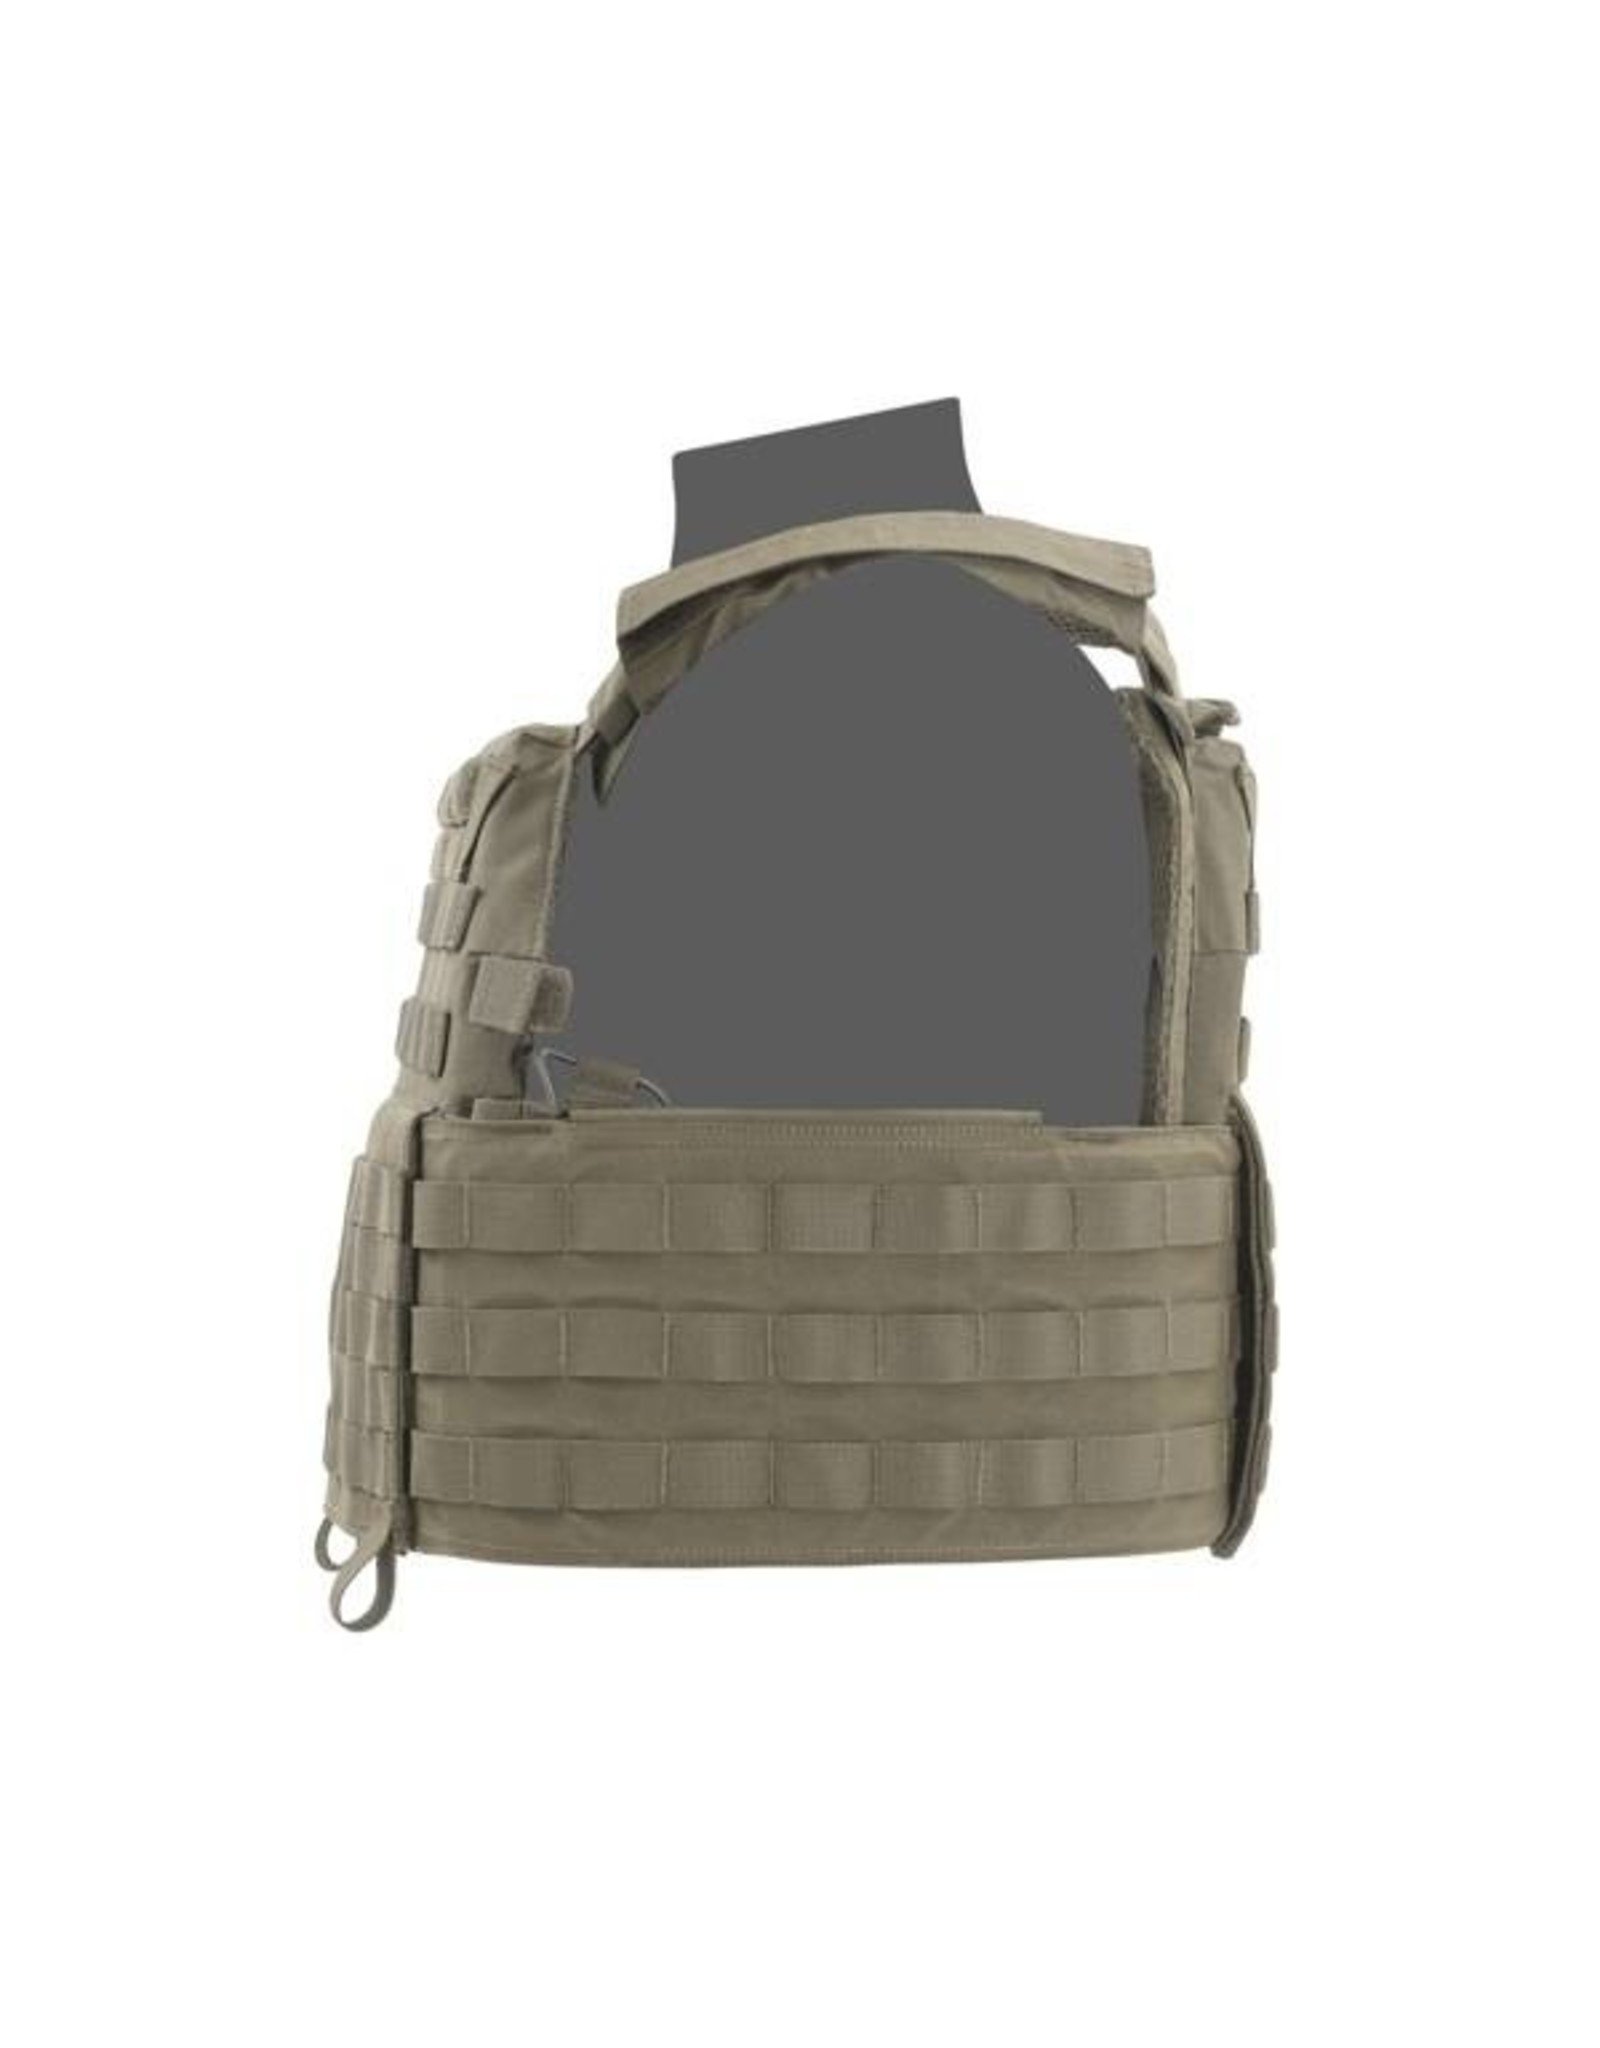 Warrior DCS Special Forces Plate Carrier Base - Ranger Green